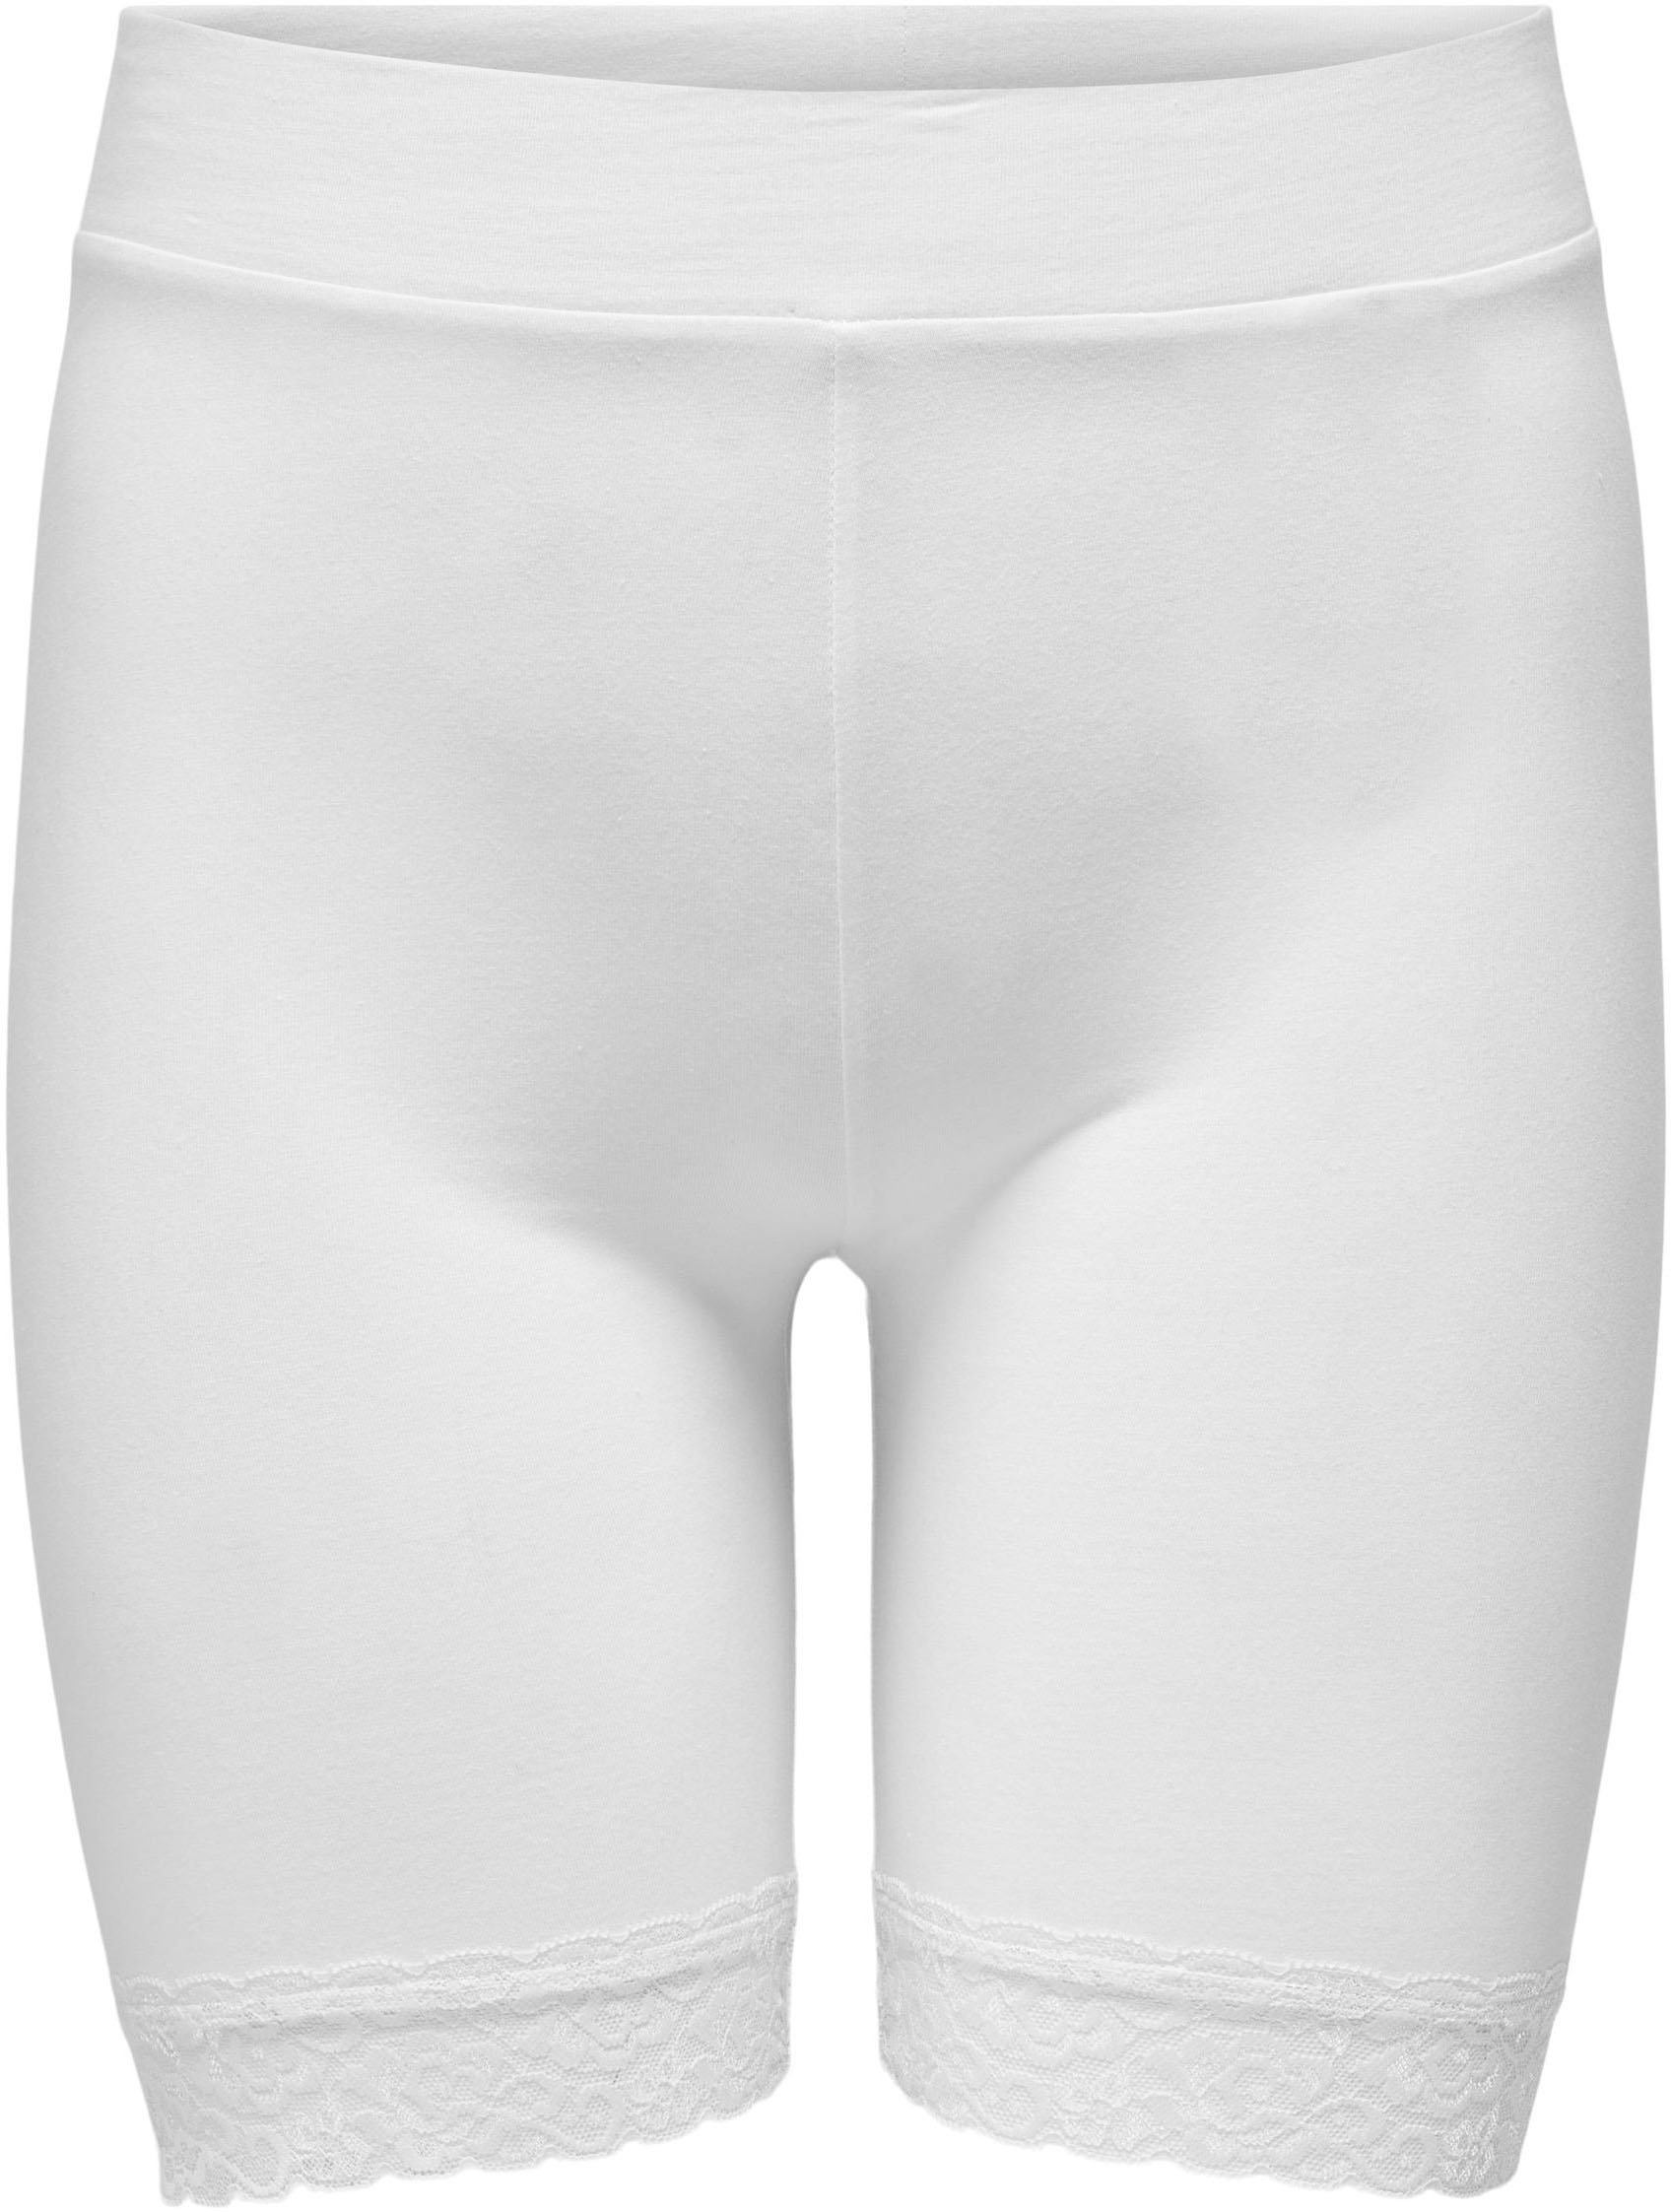 CARMAKOMA LACE LIFE LIFE NOOS« bei ♕ WITH ONLY »CARTIME SHORTS Radlerhose